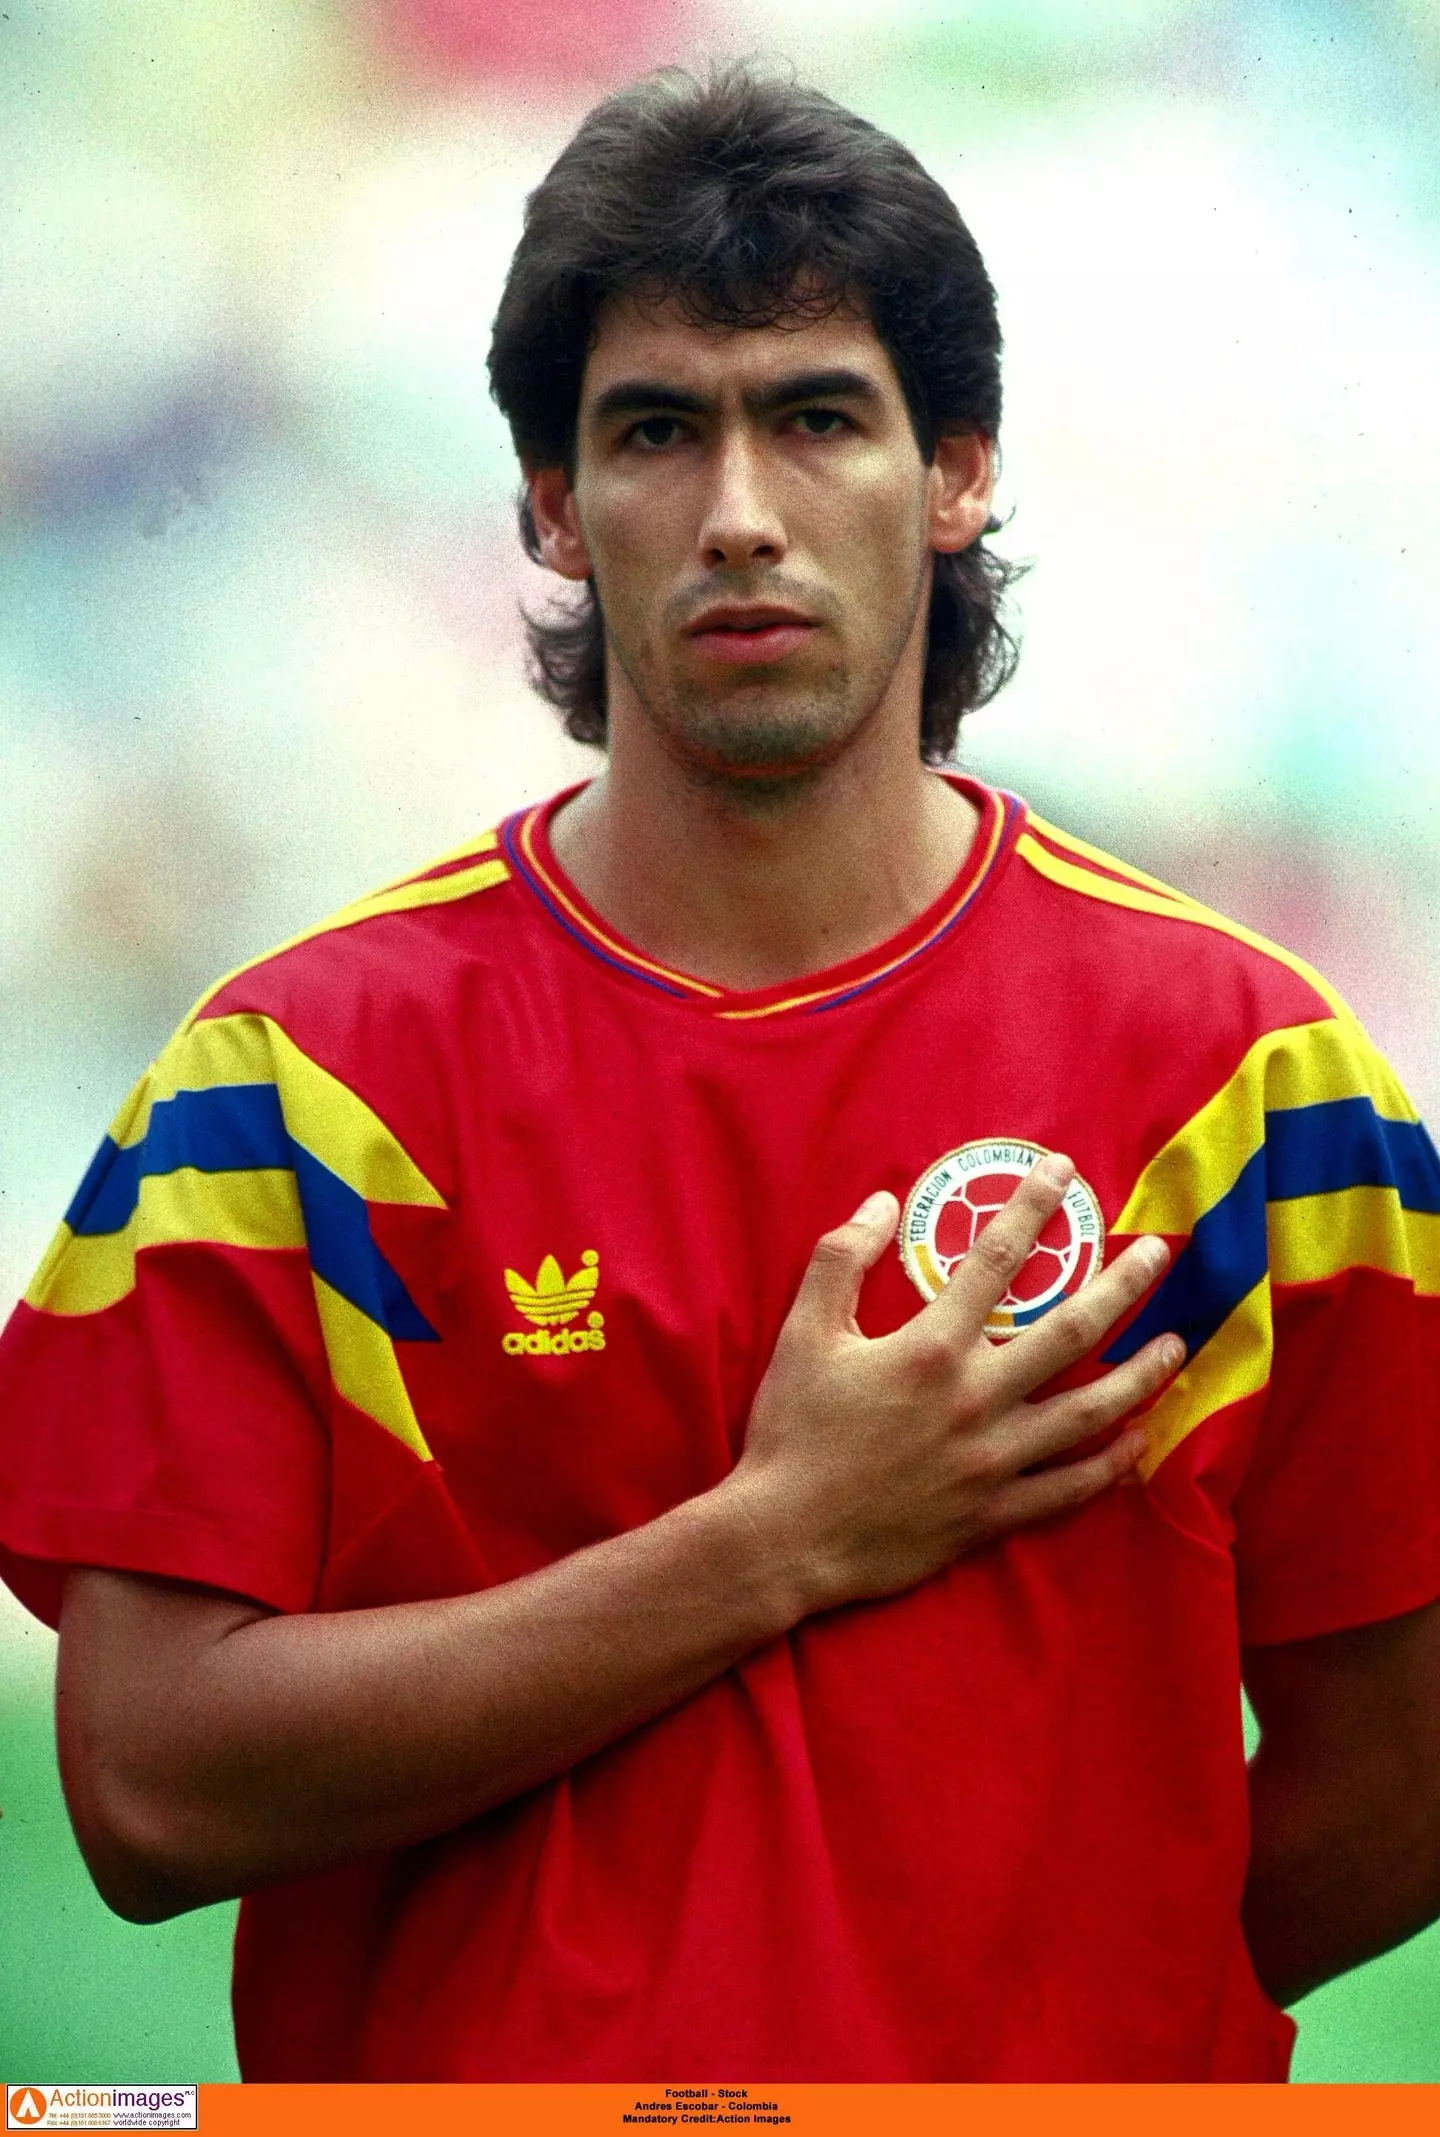 Colombia captain Andrés Escobar's performance in 1994’s World Cup sealed his fate.